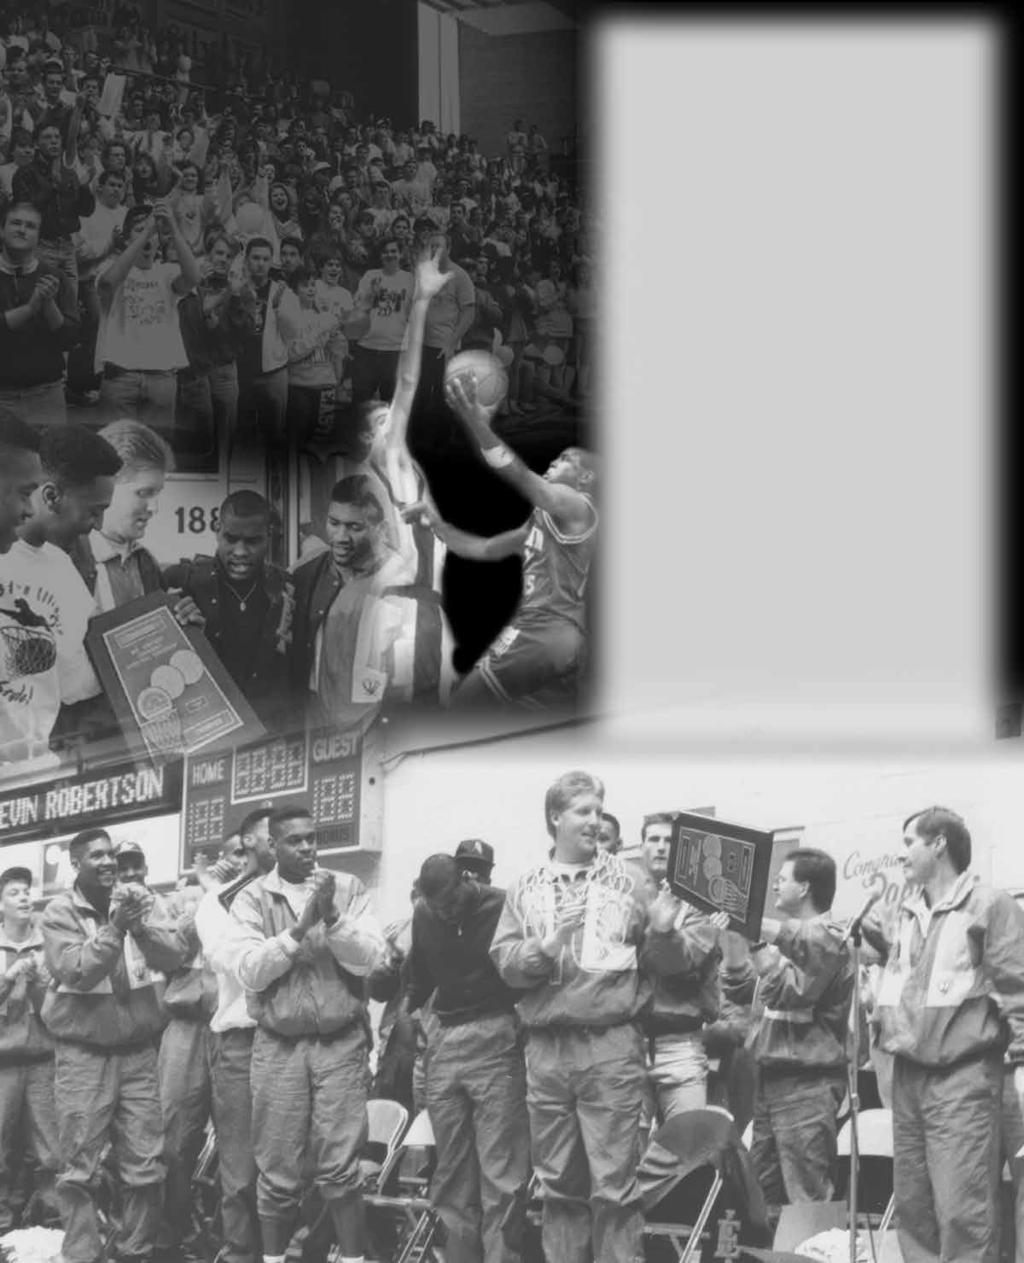 EASTERN ILLINOIS TOURNAMENT HISTORY GOING DANCING IN 1992 'DREAMS DO COME TRUE' You coach this sport with a dream to get to the NCAA tournament.